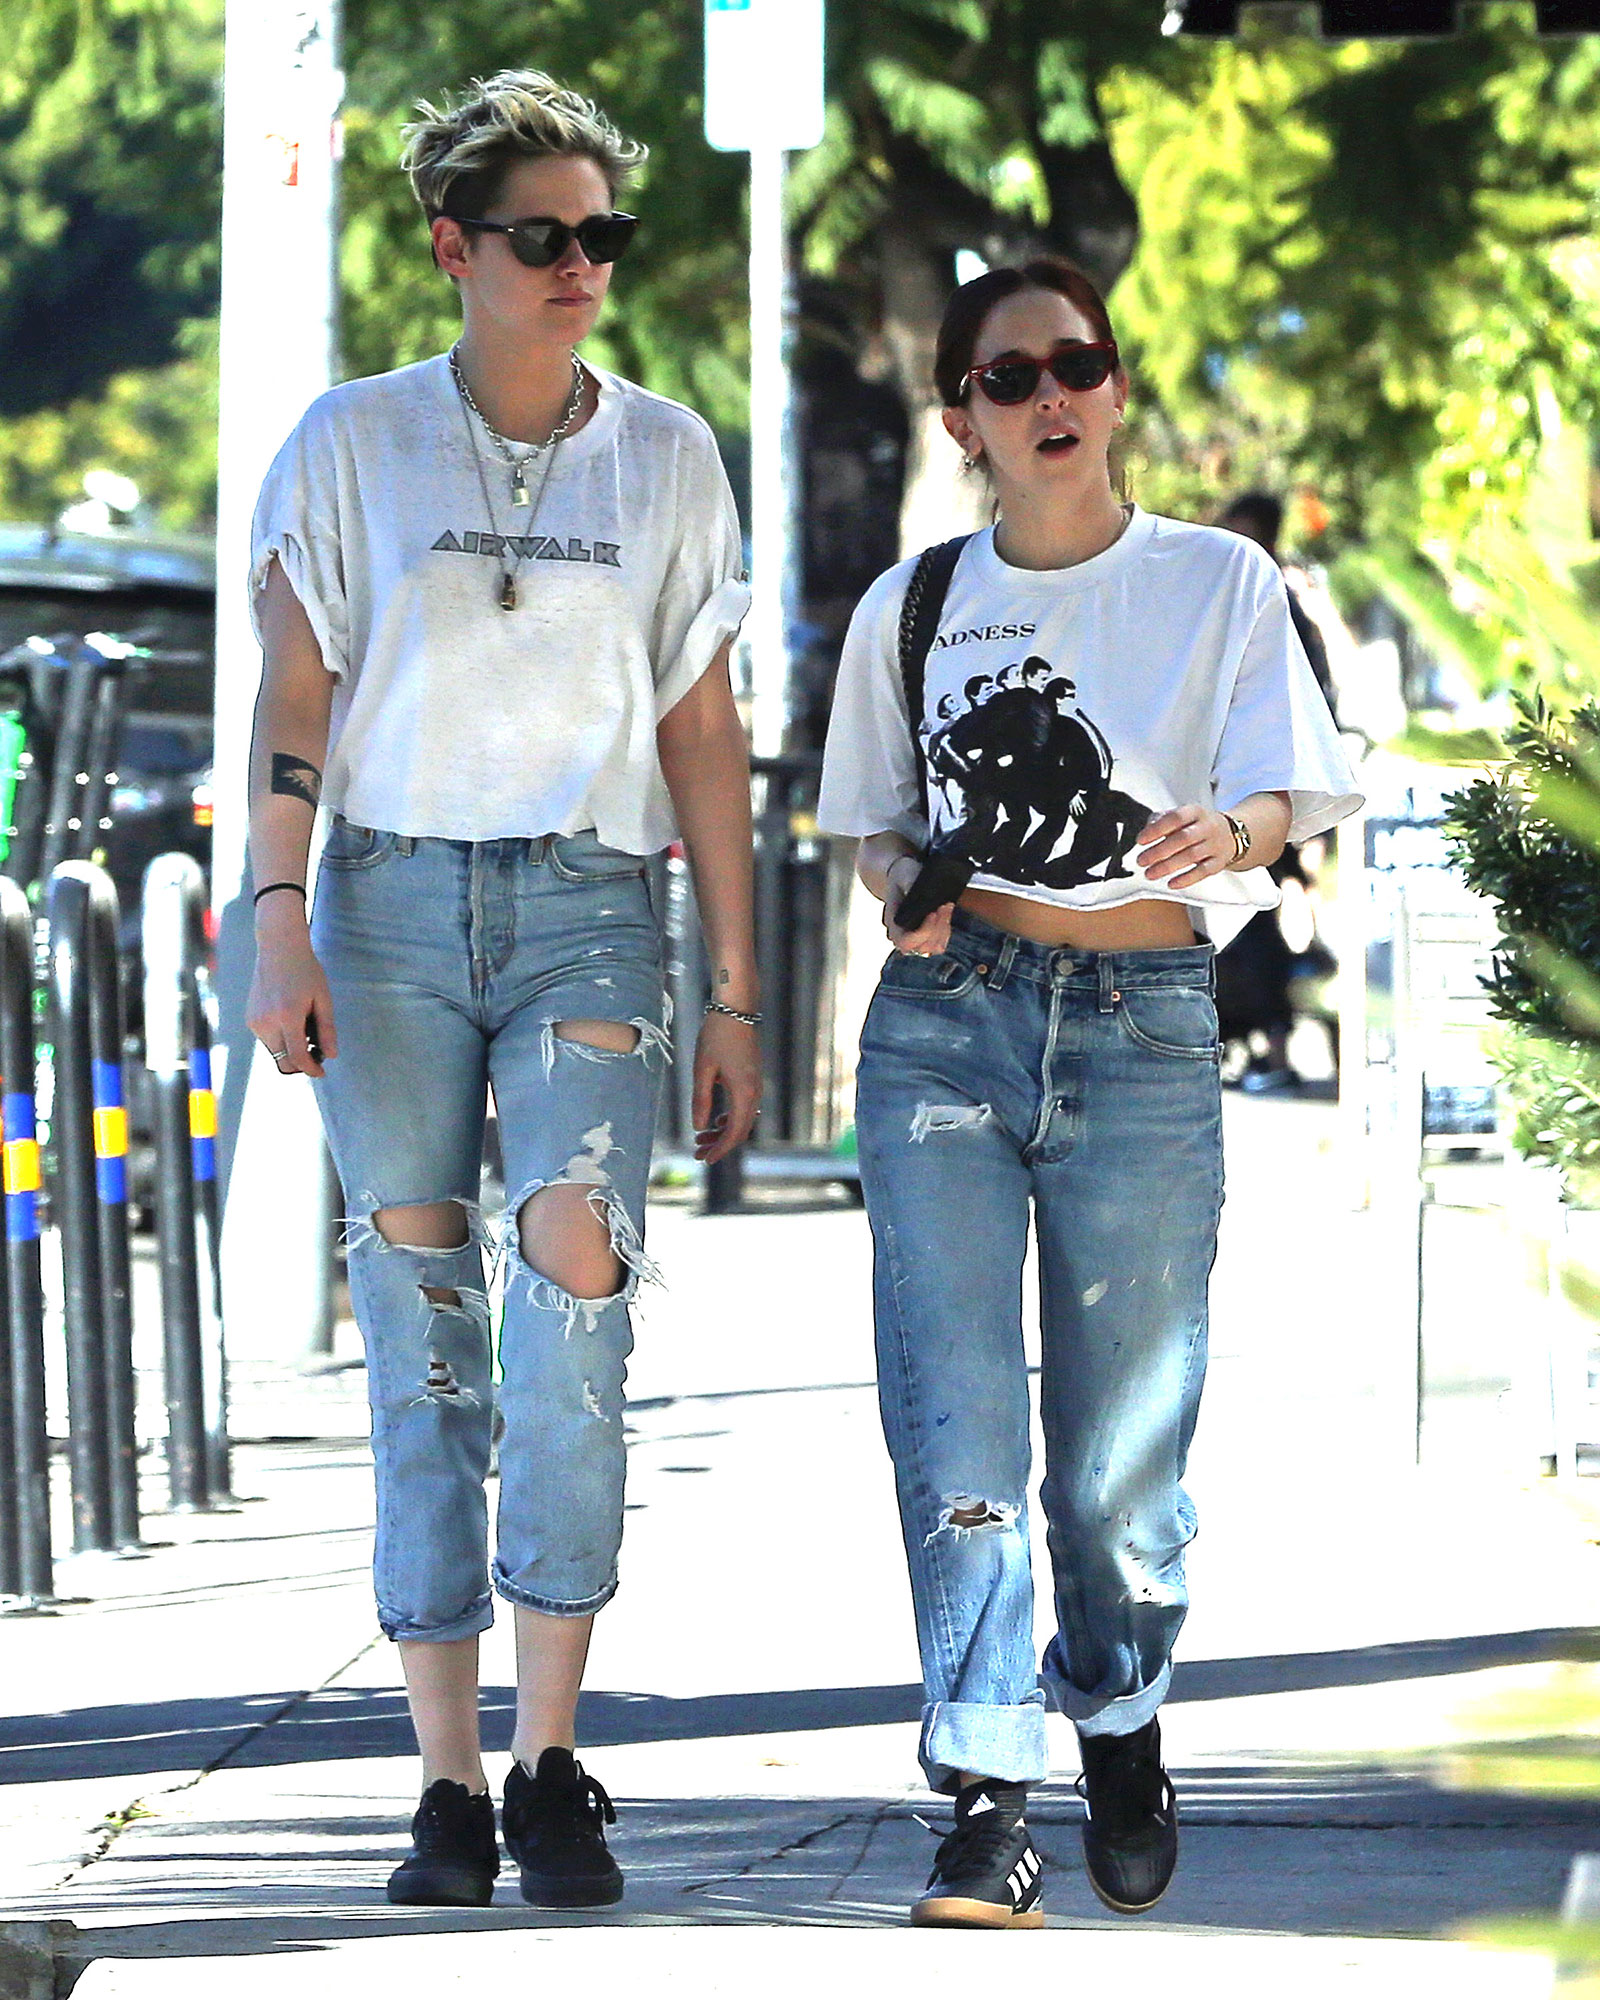 Kristen Stewart Sparks Stella Maxwell Split Rumors After Holding Hands With Mystery Woman